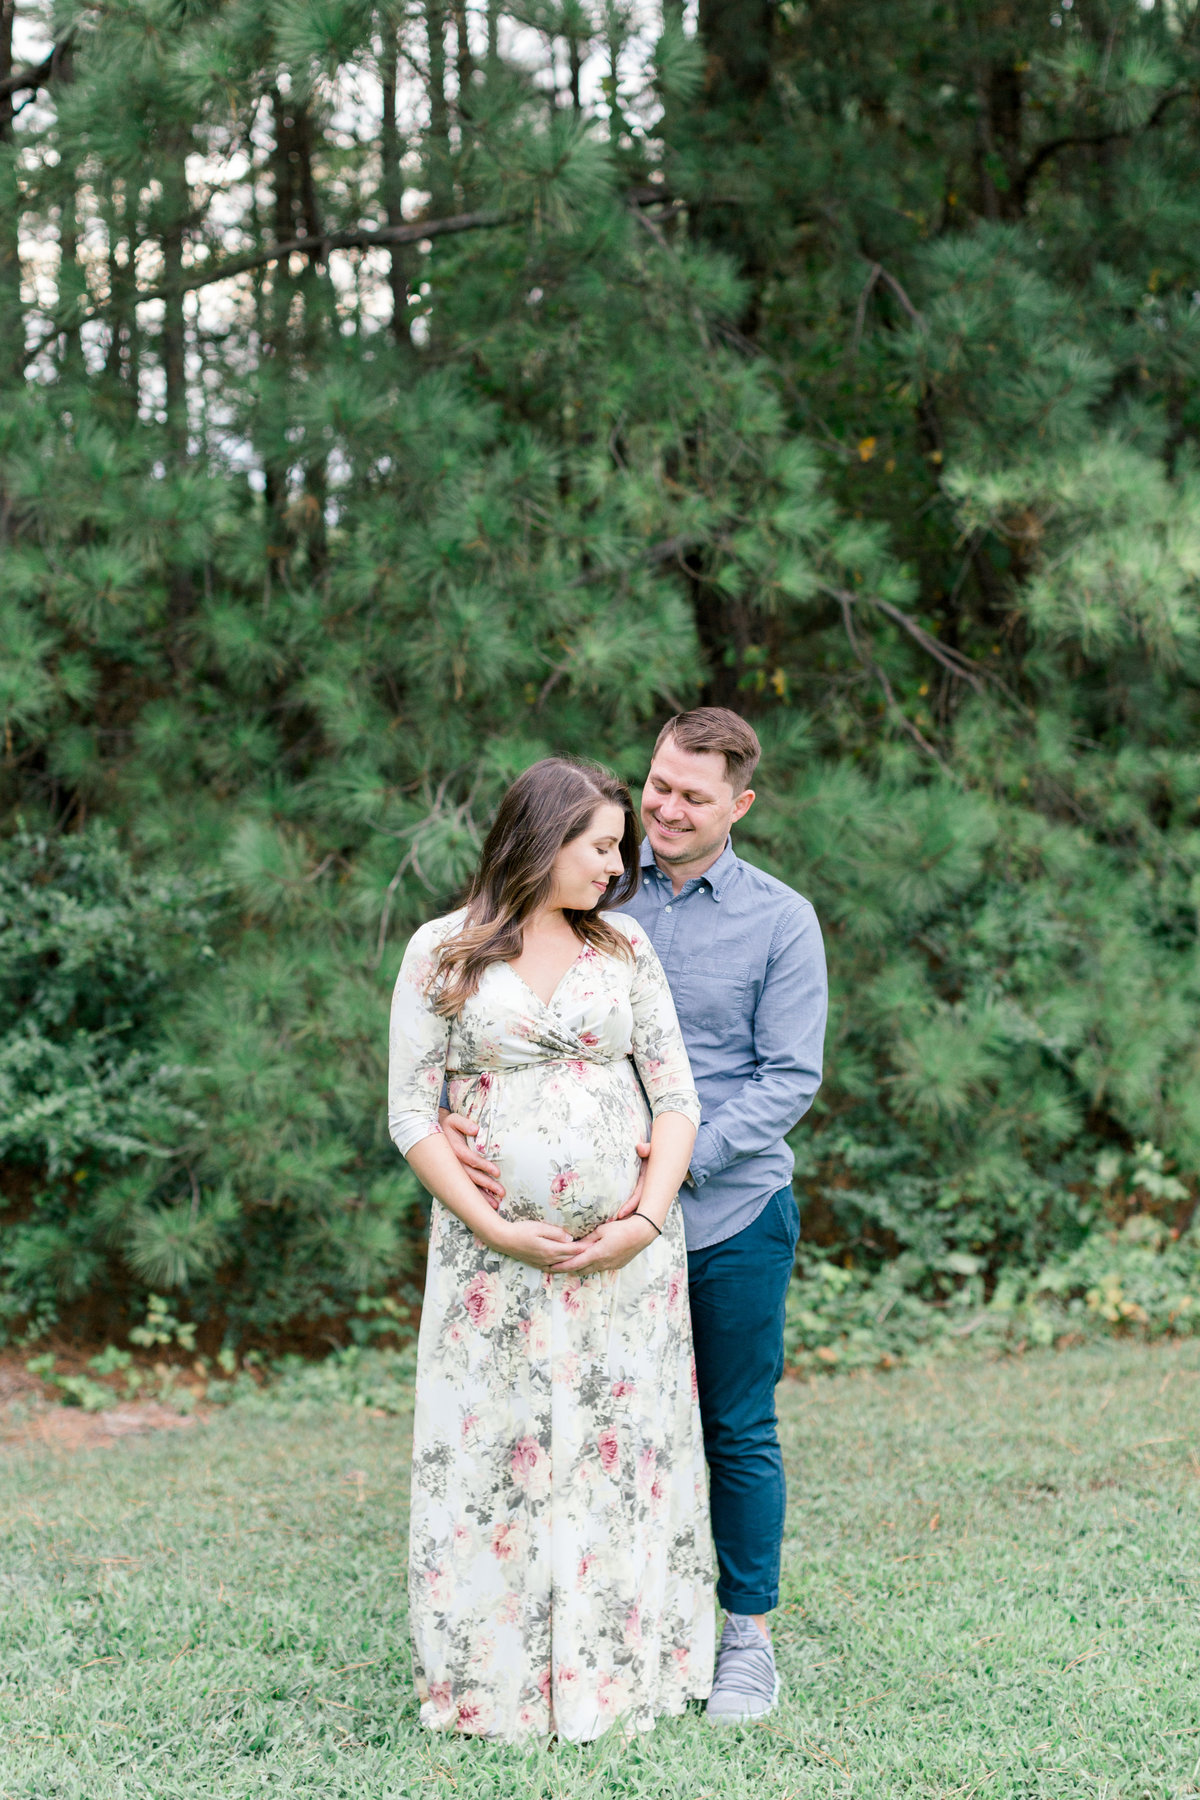 Dave and Emily-Maternity Session-Samantha Laffoon Photography-45